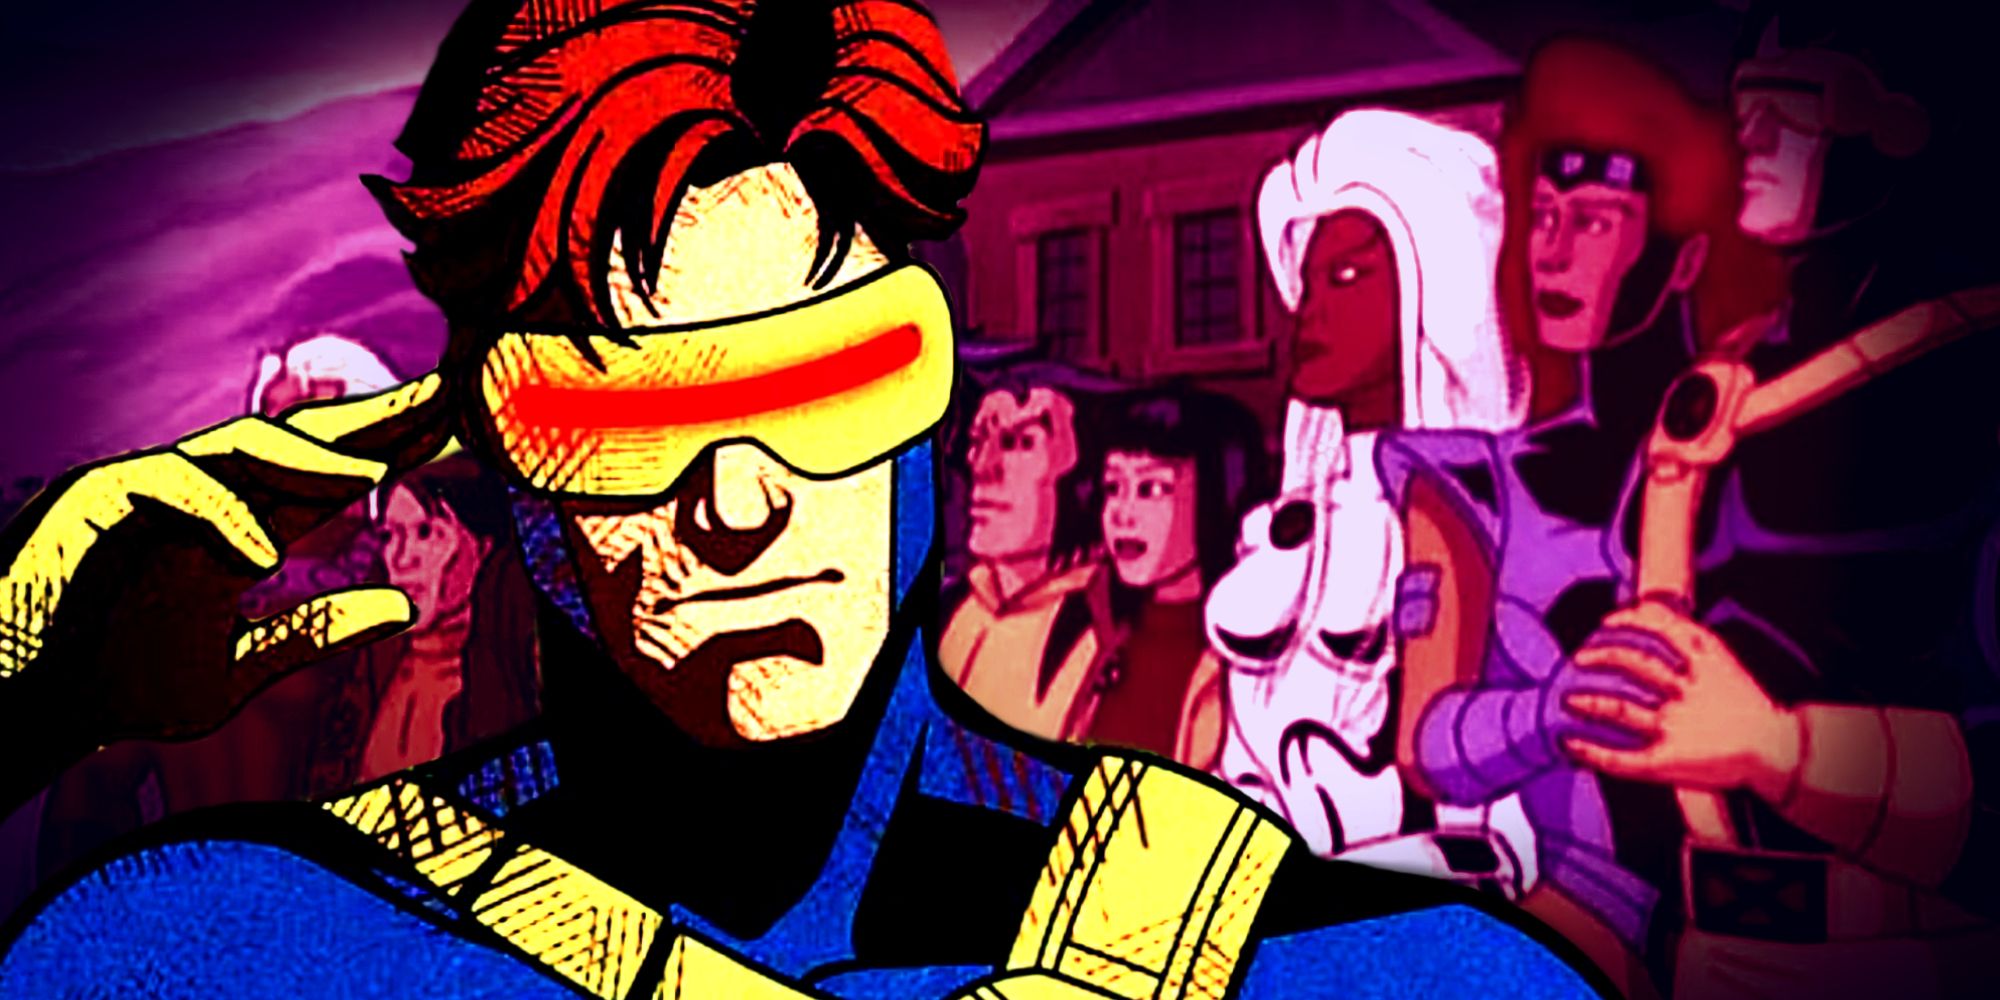 Cyclops Touches his Glasses with the Mutants in the Background in X-Men '97